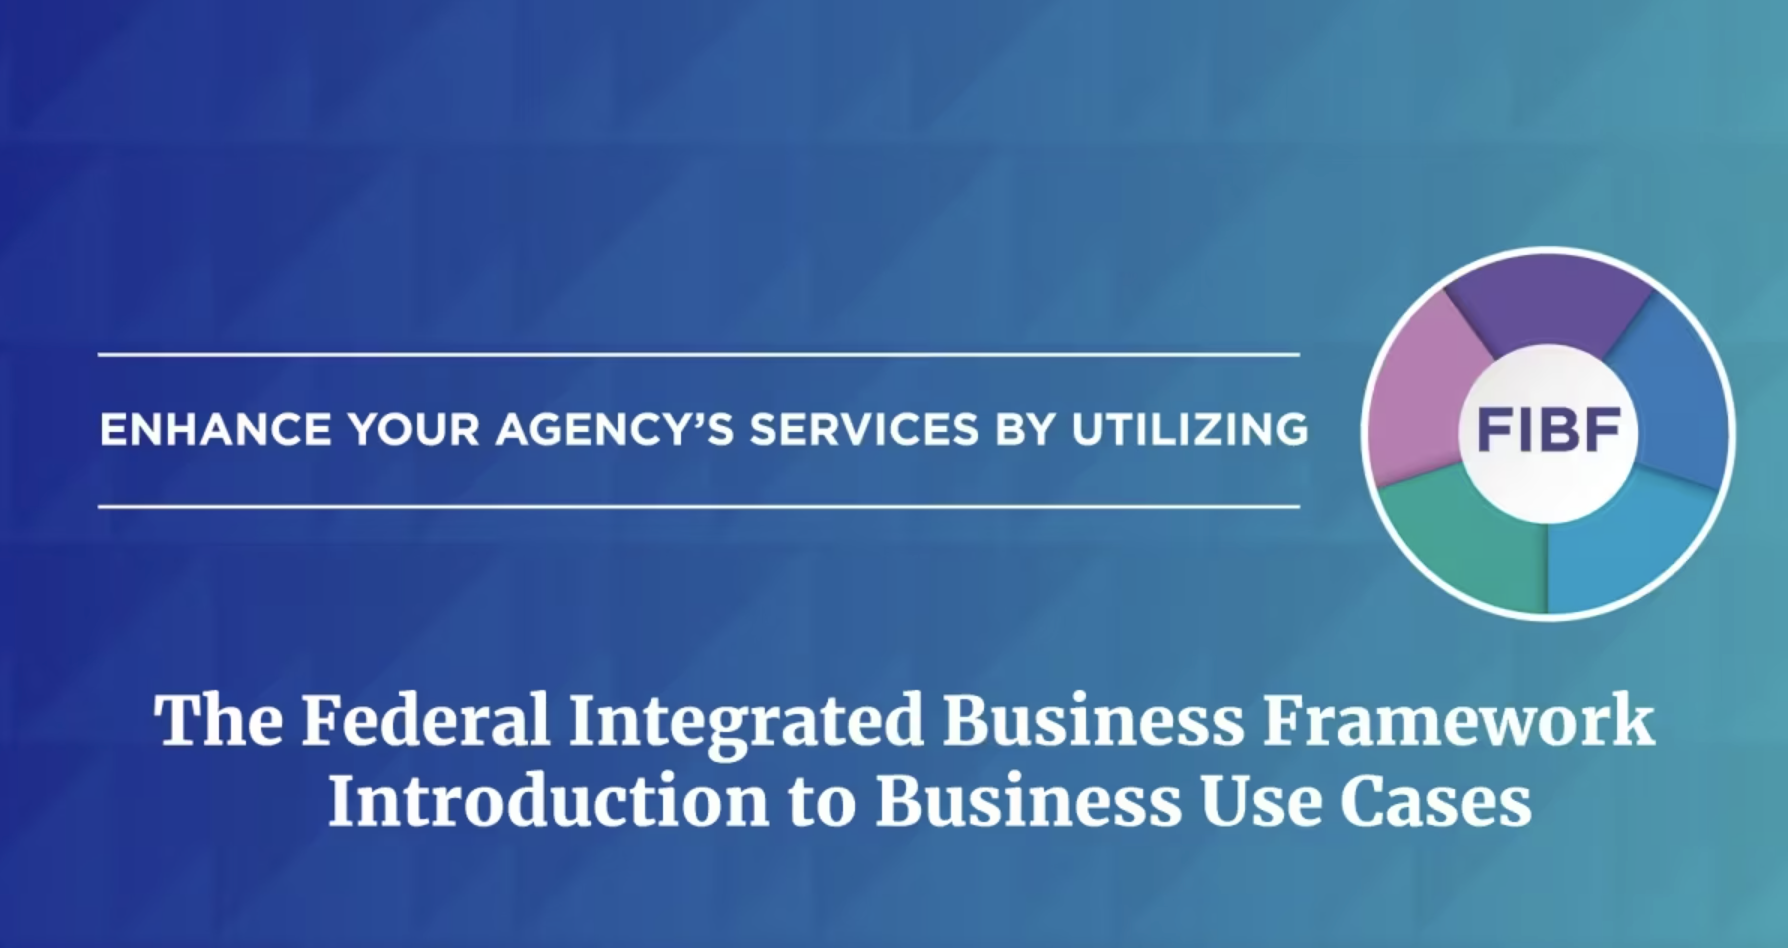 FIBF Business Use Cases Image